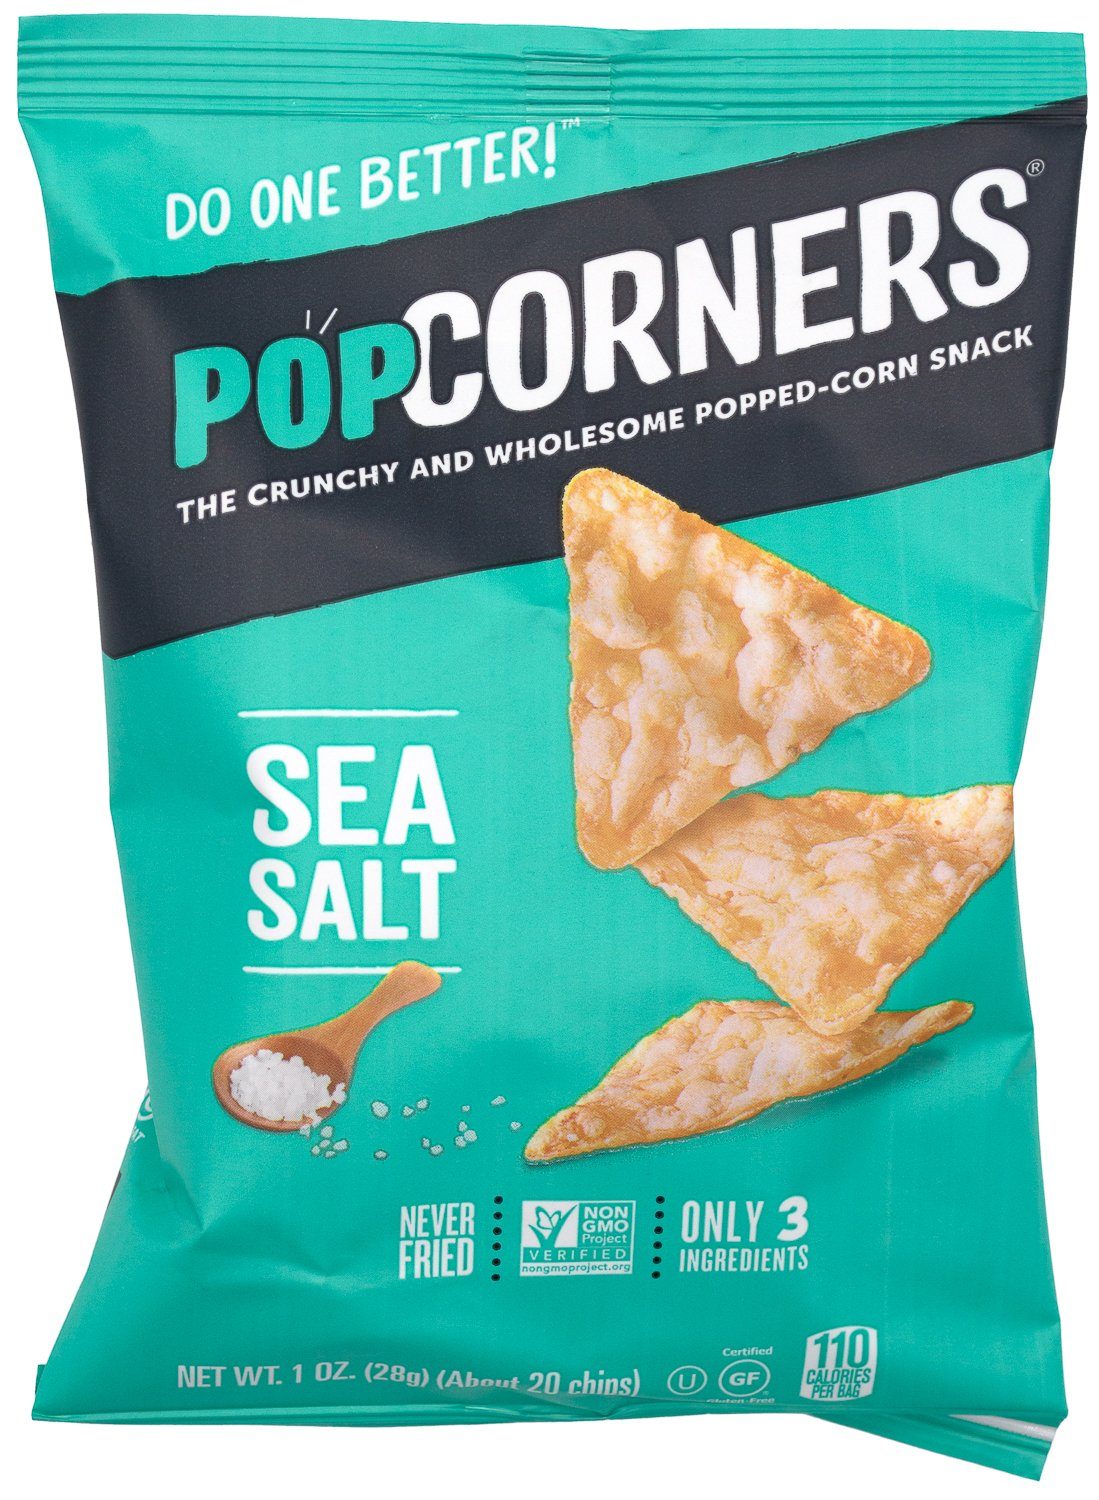 Popcorners - The Crunchy and Wholesome Popped-corn Snack Popcorners Sea Salt 1 Ounce 